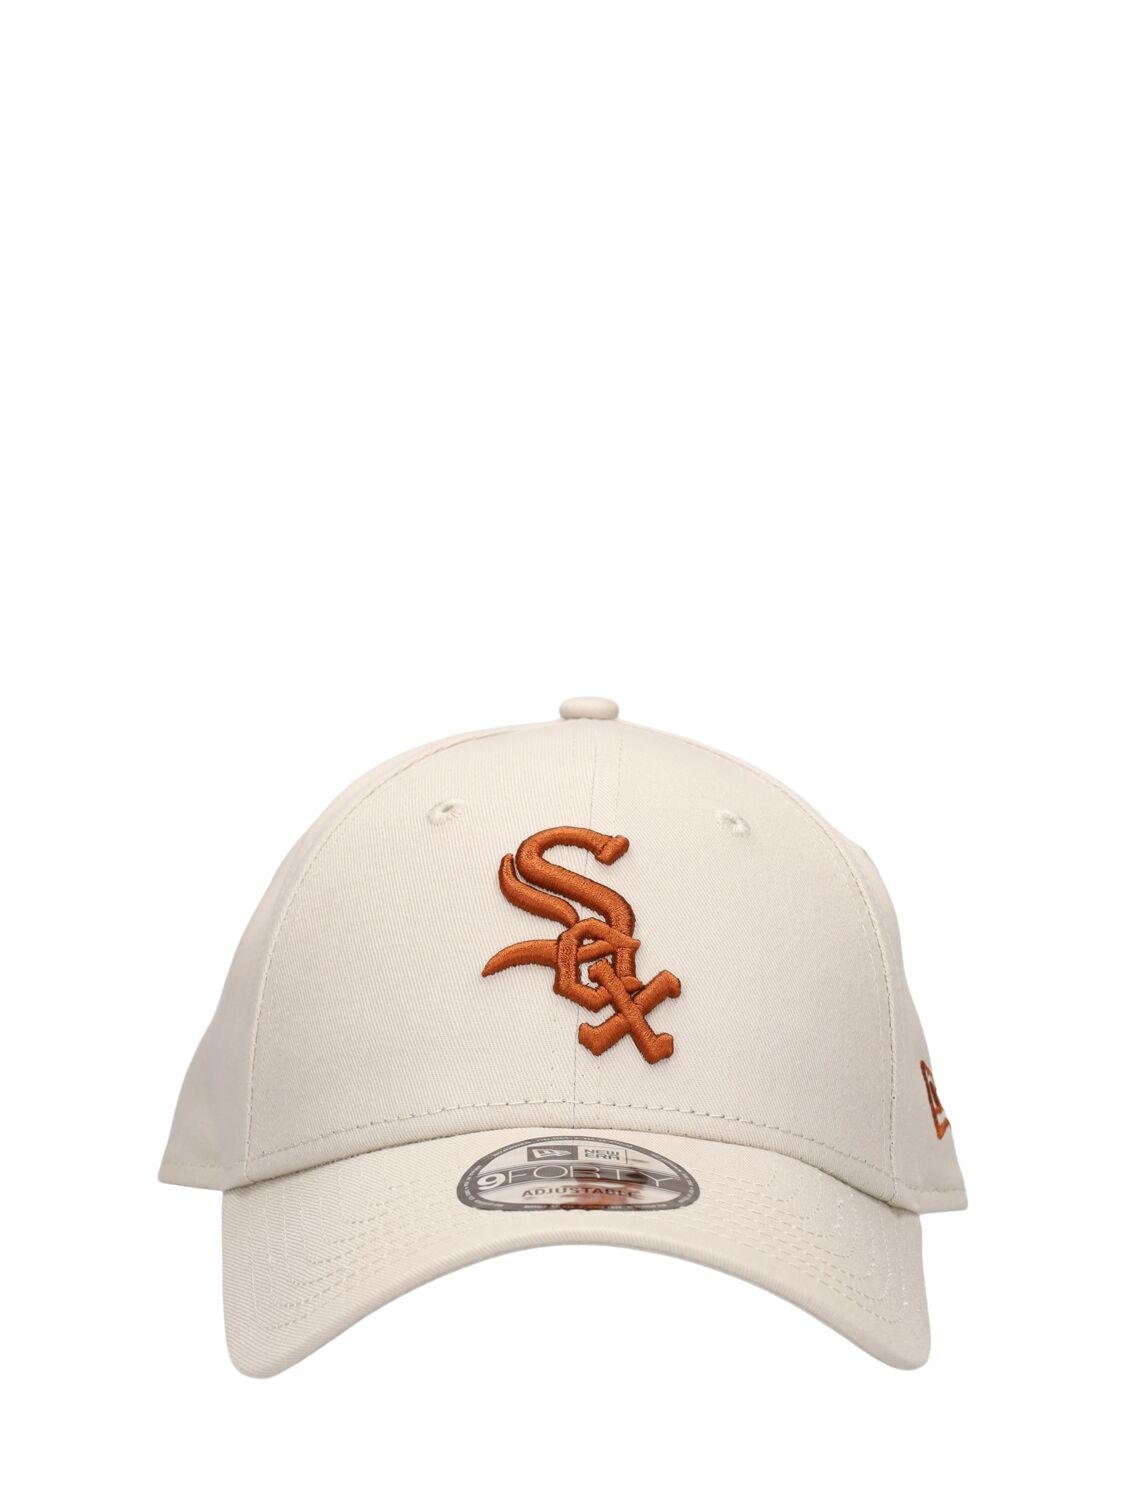 Chicago White Sox 9forty Cotton Cap by NEW ERA